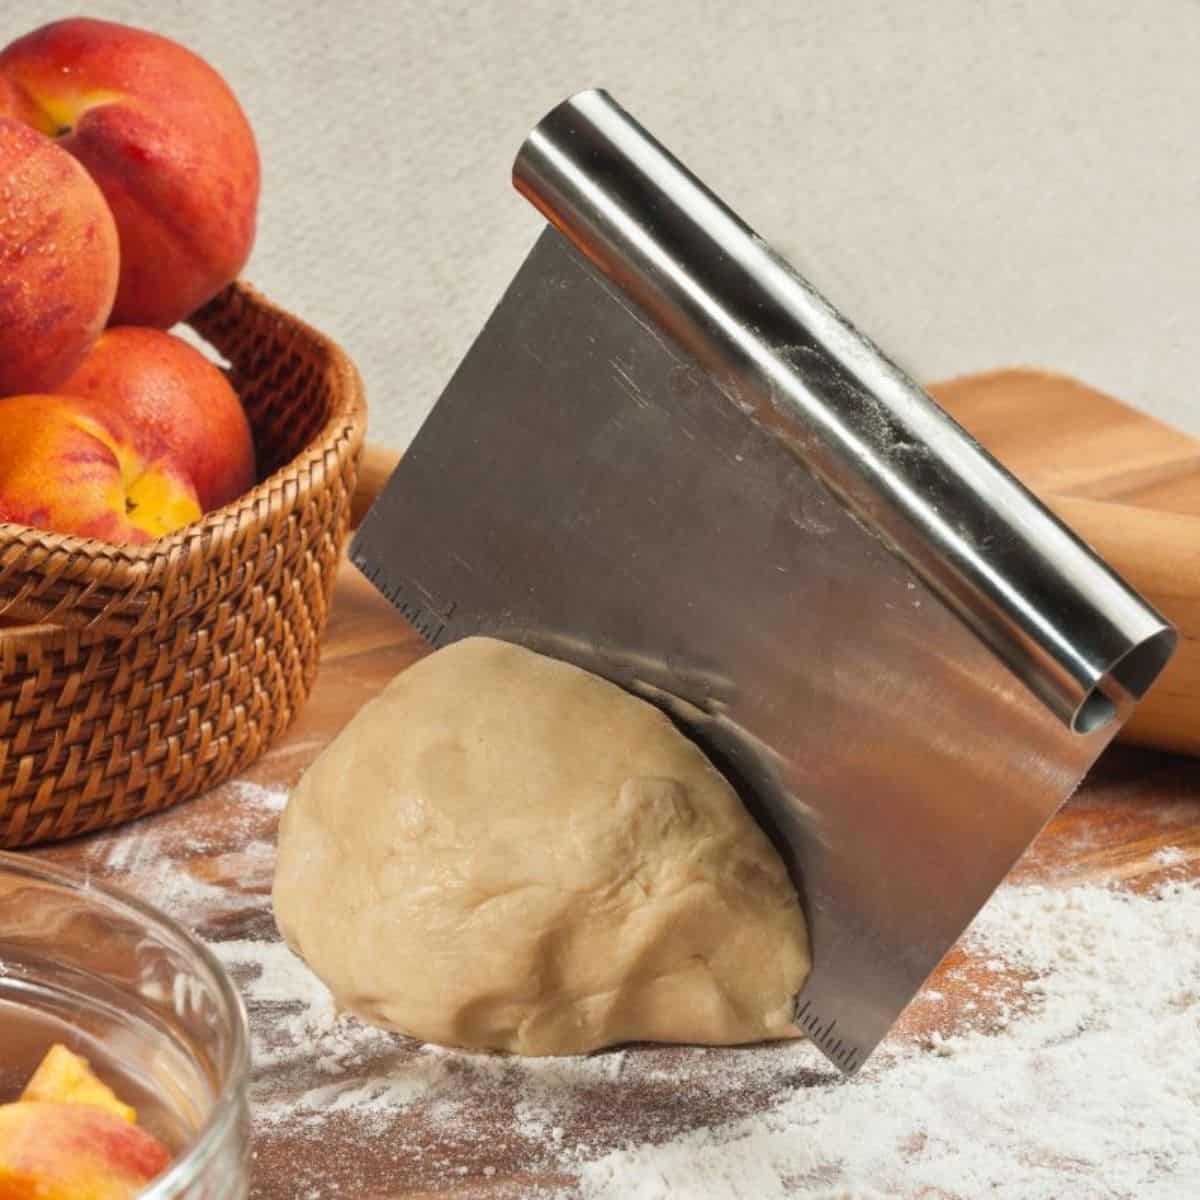 MS WGO Pro Dough Pastry Scraper/Cutter/Chopper Stainless Steel Mirror Polished with Measuring Scale Multipurpose- Cake, Pizza Cutter - Pastry Bread